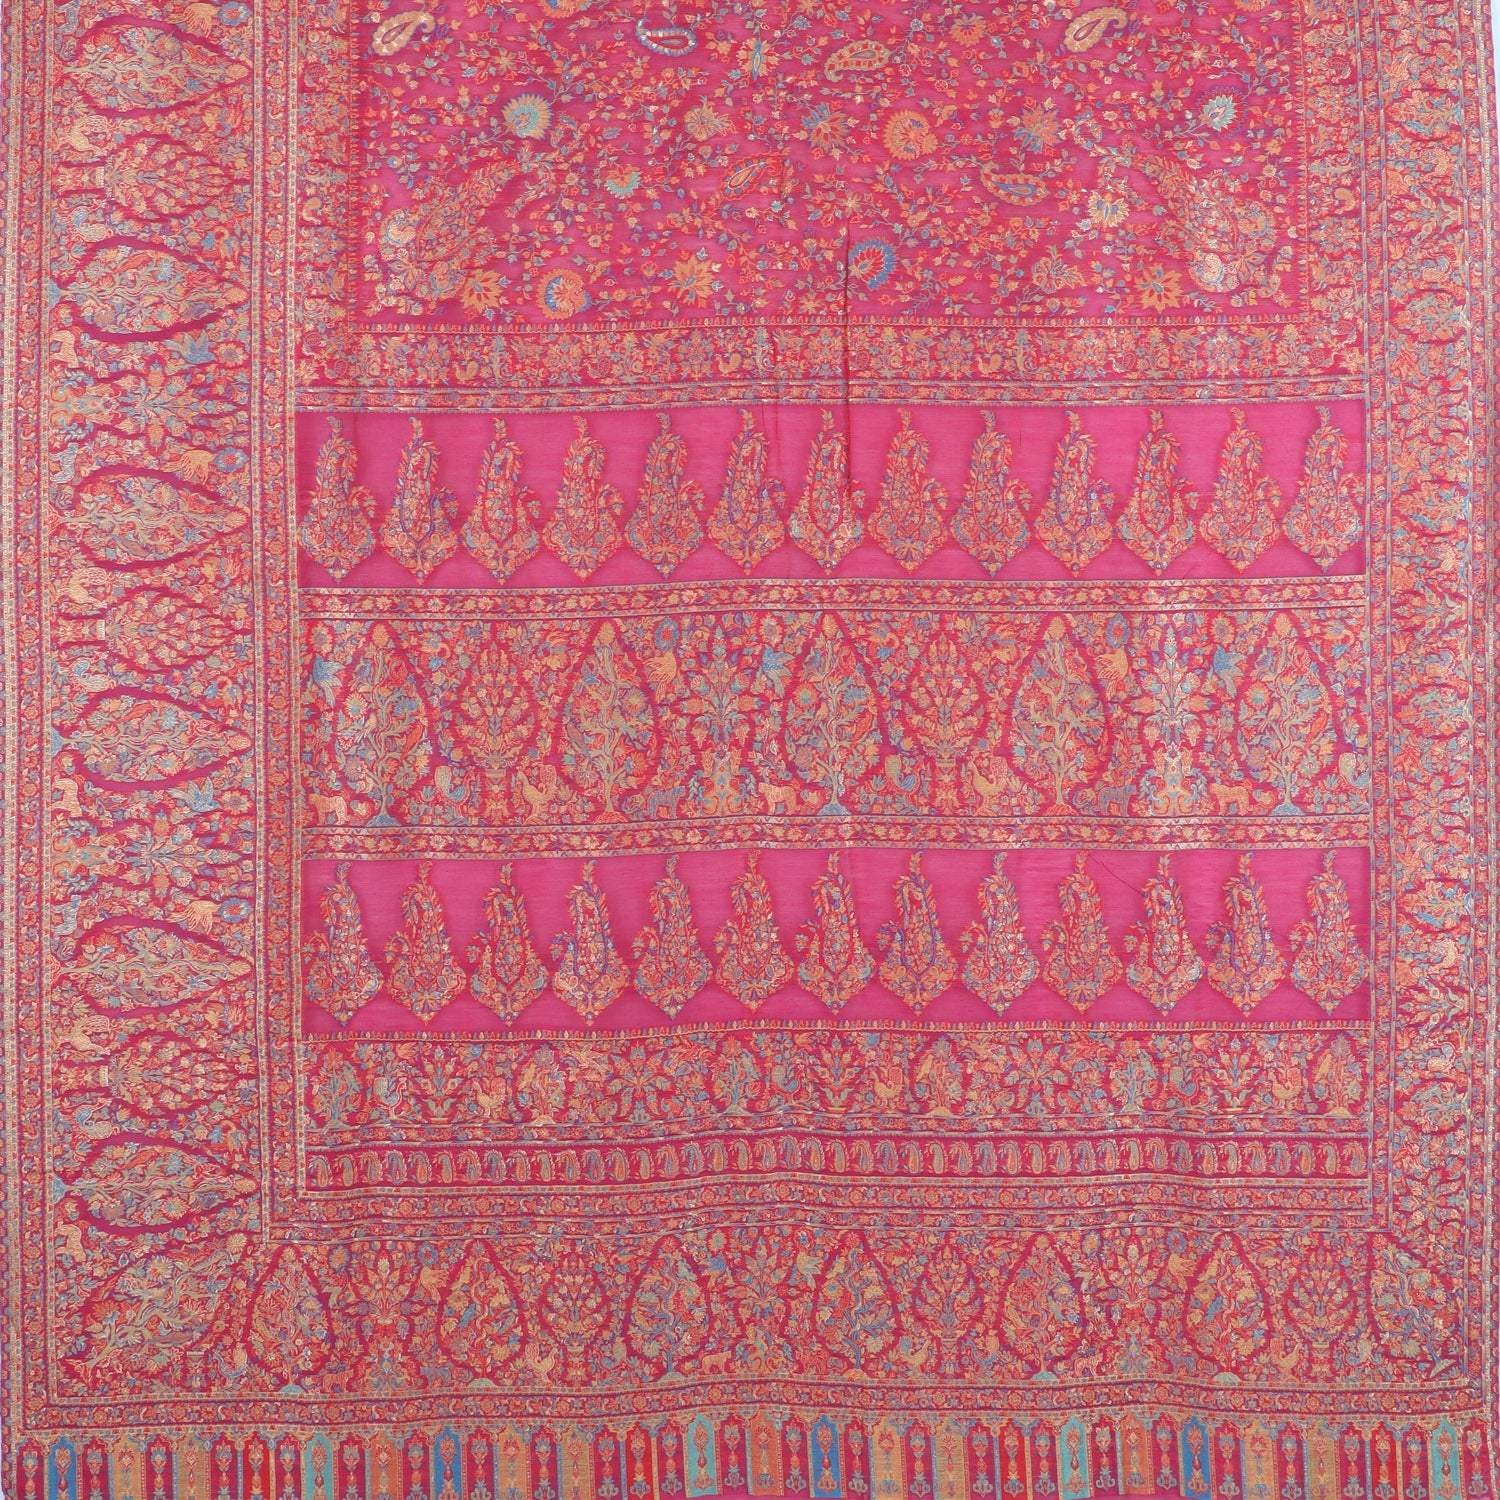 French Pink Kani Silk Handloom Saree With Floral Pattern - Singhania's